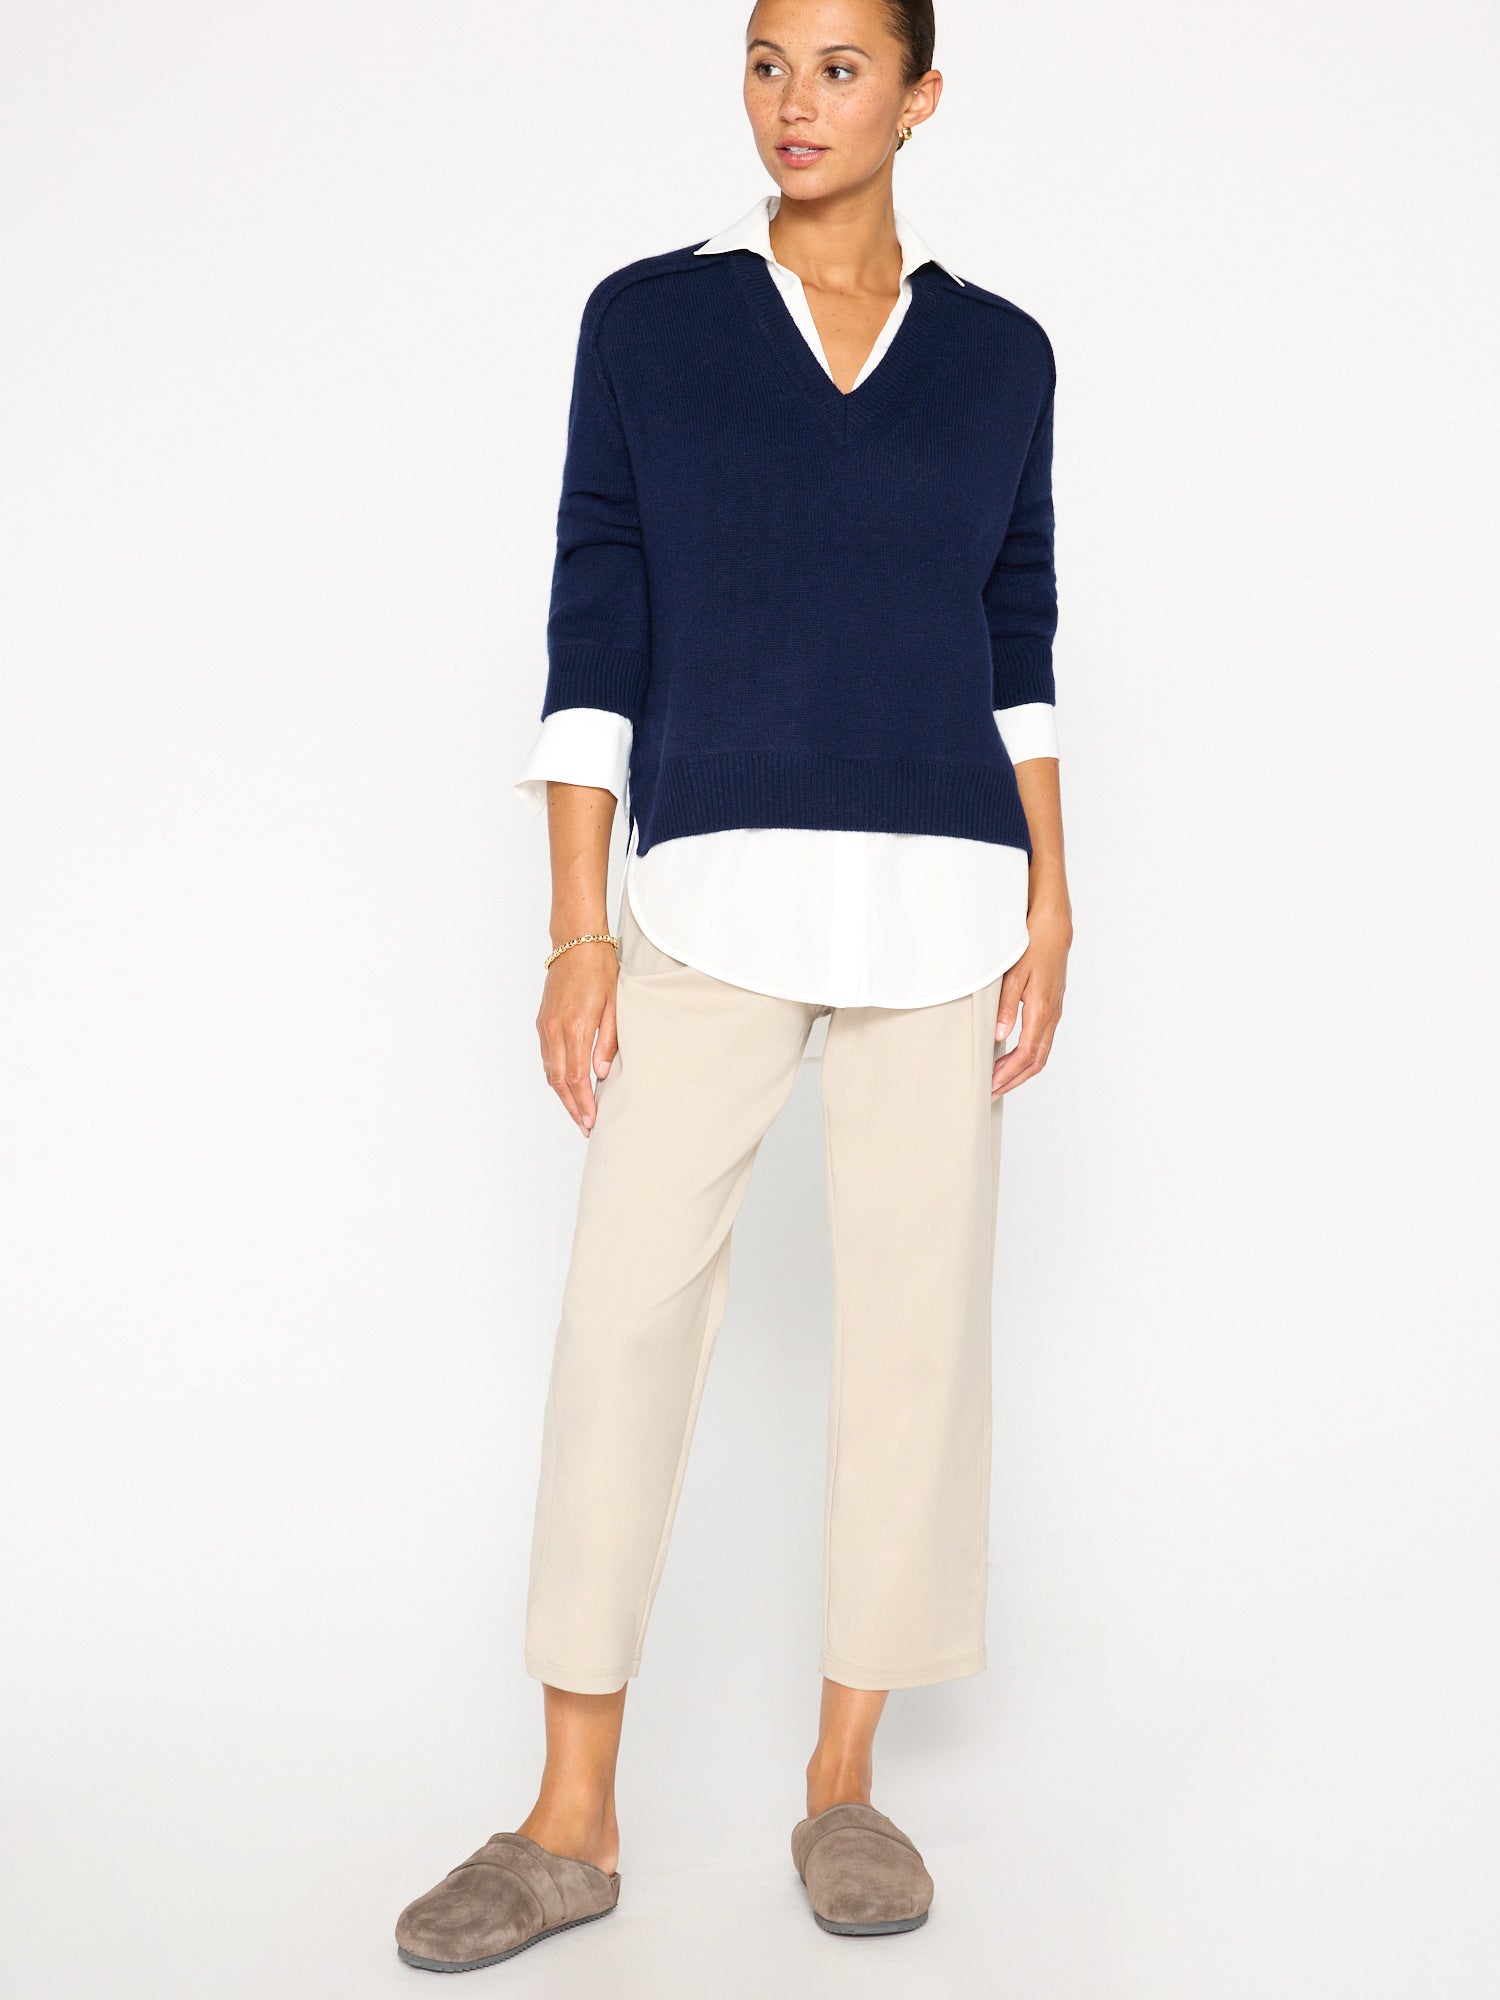 Looker navy layered v-neck sweater full view